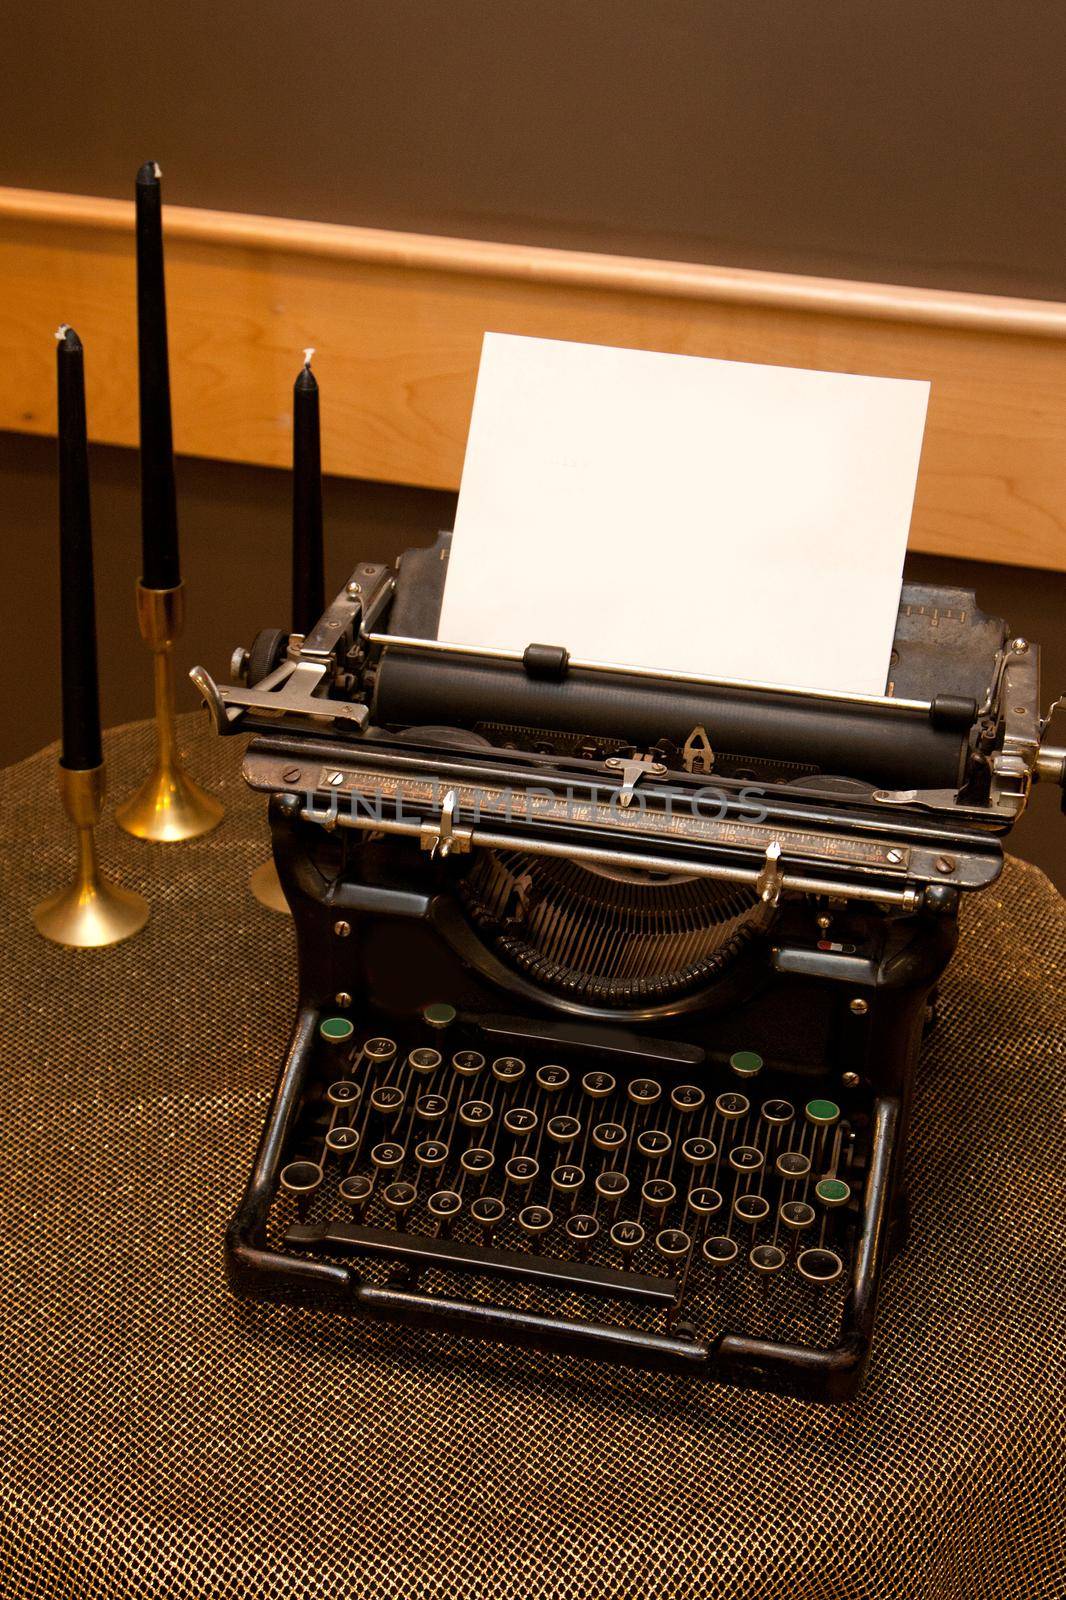 Decorative or old fashioned typewriter adding machine on a gold tablecloth with black candles 